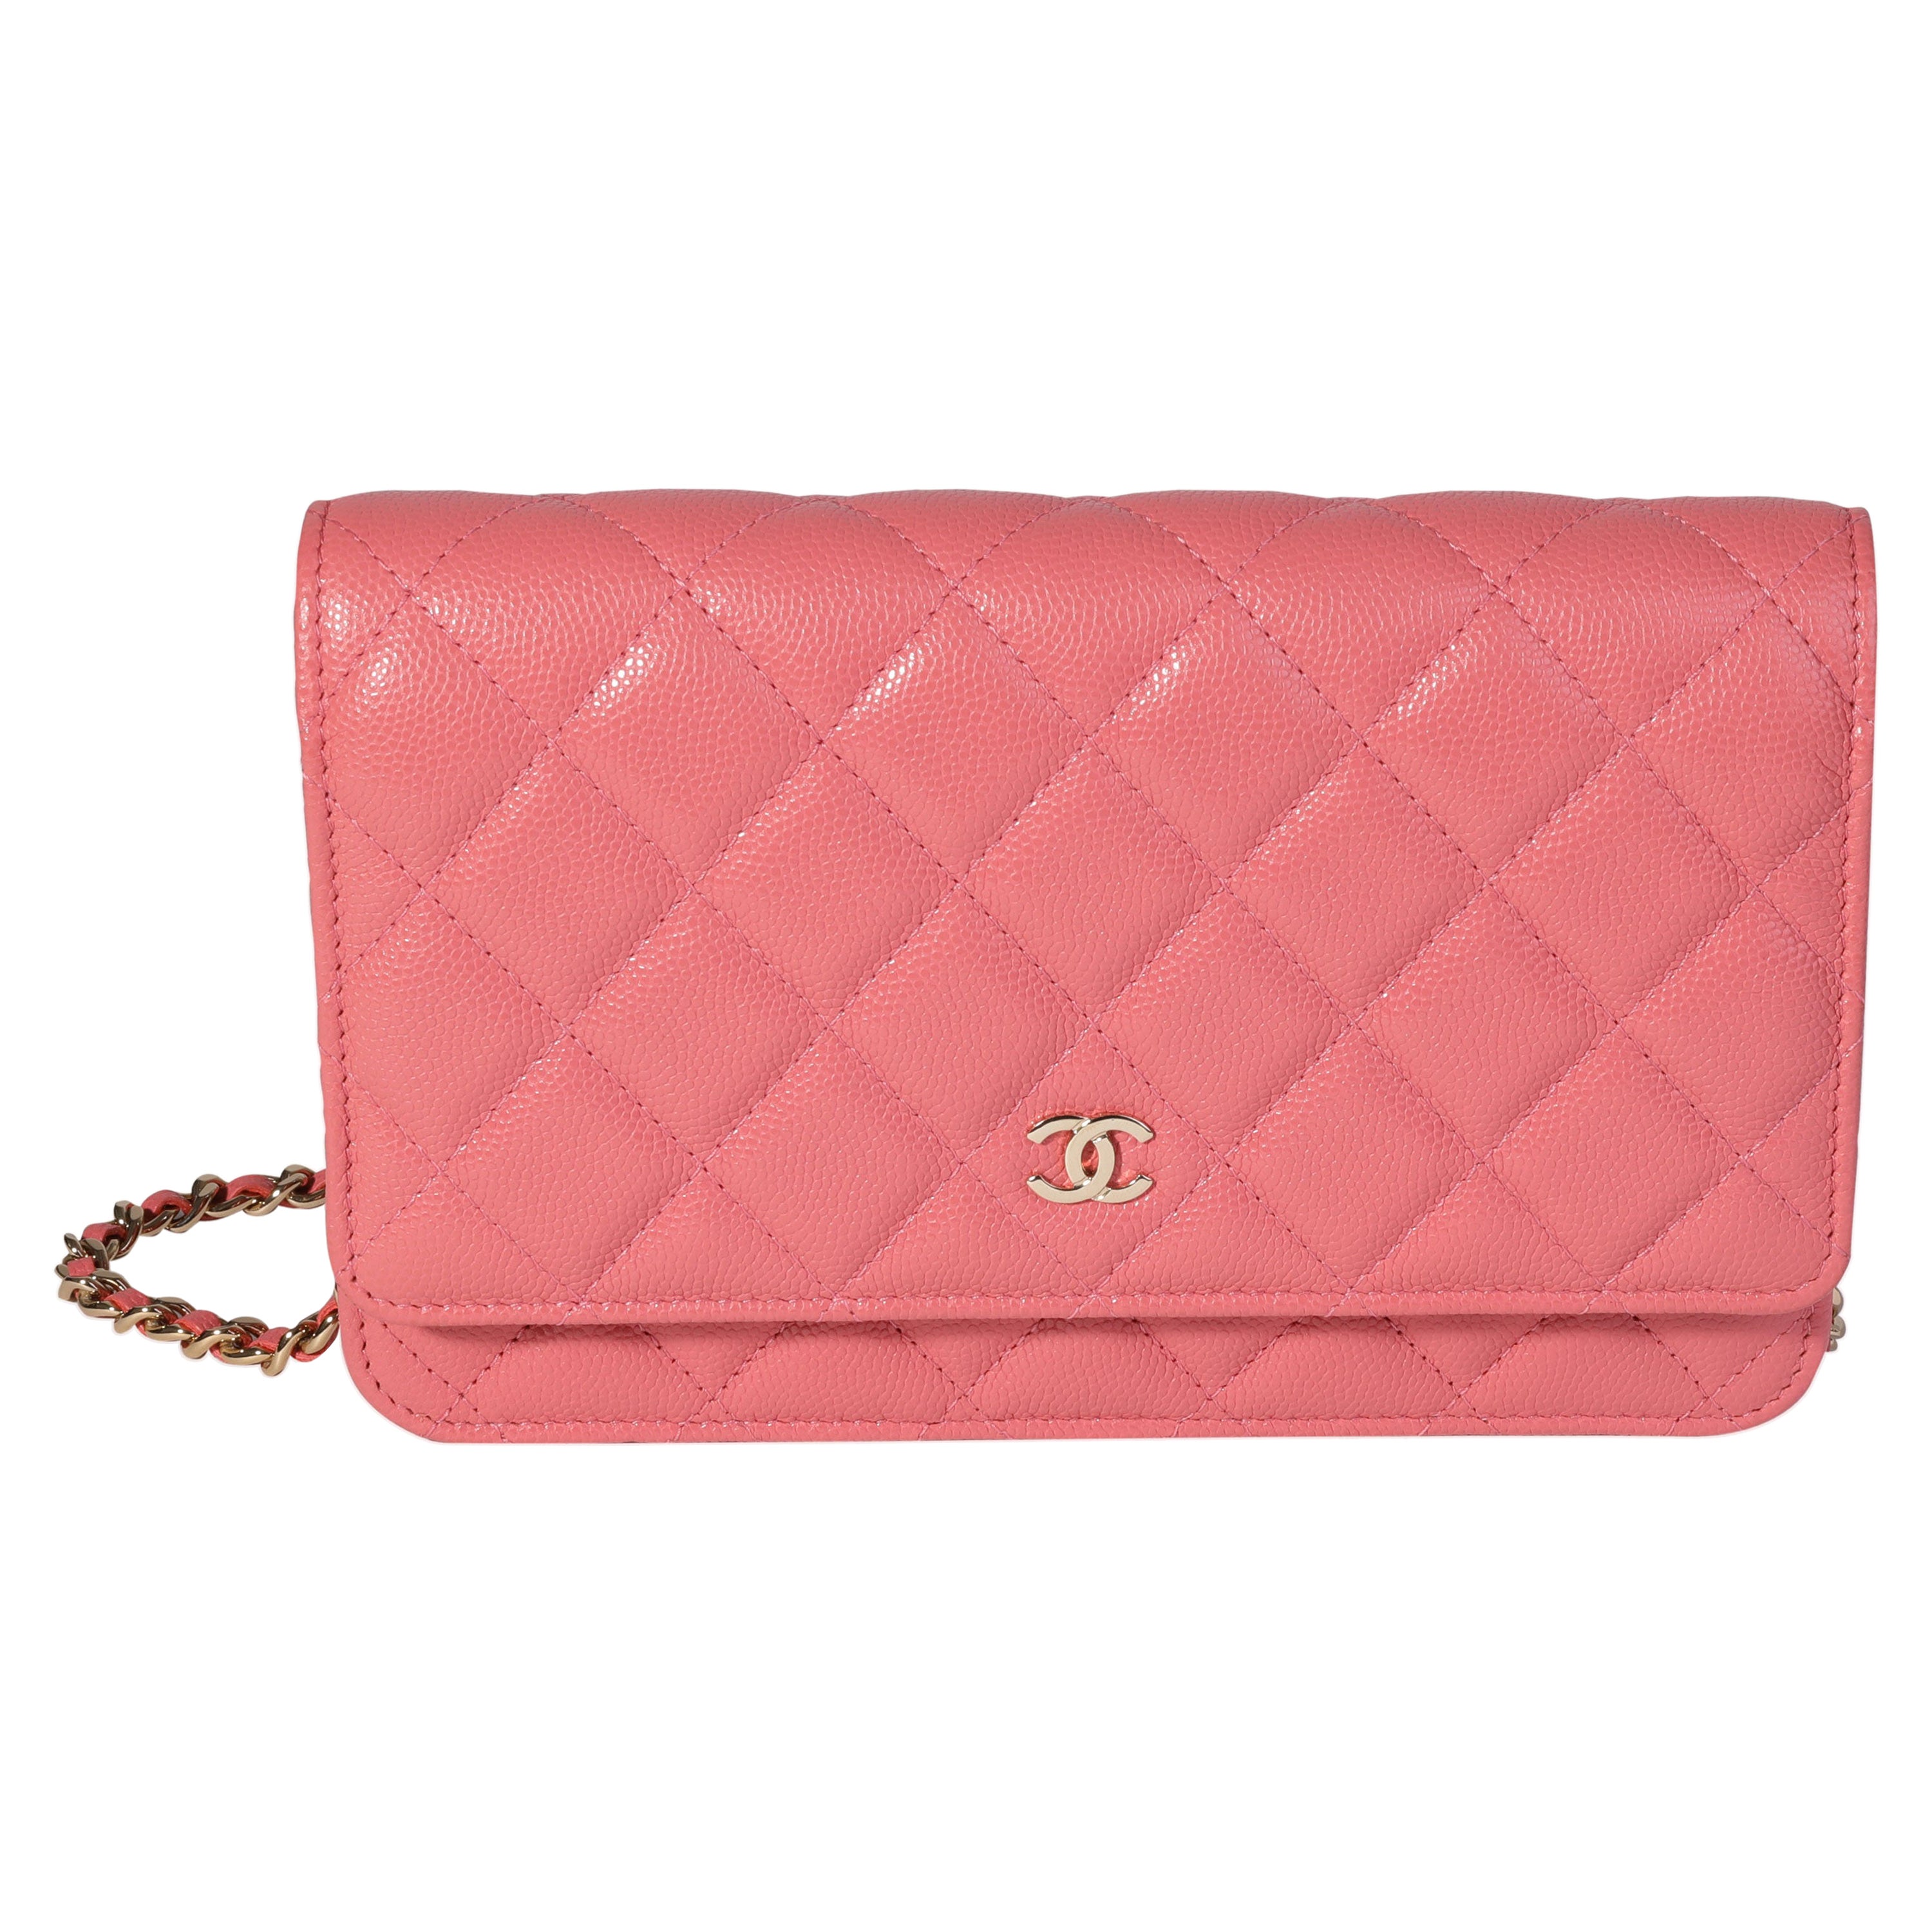 Chanel Pink Quilted Caviar Wallet on Chain